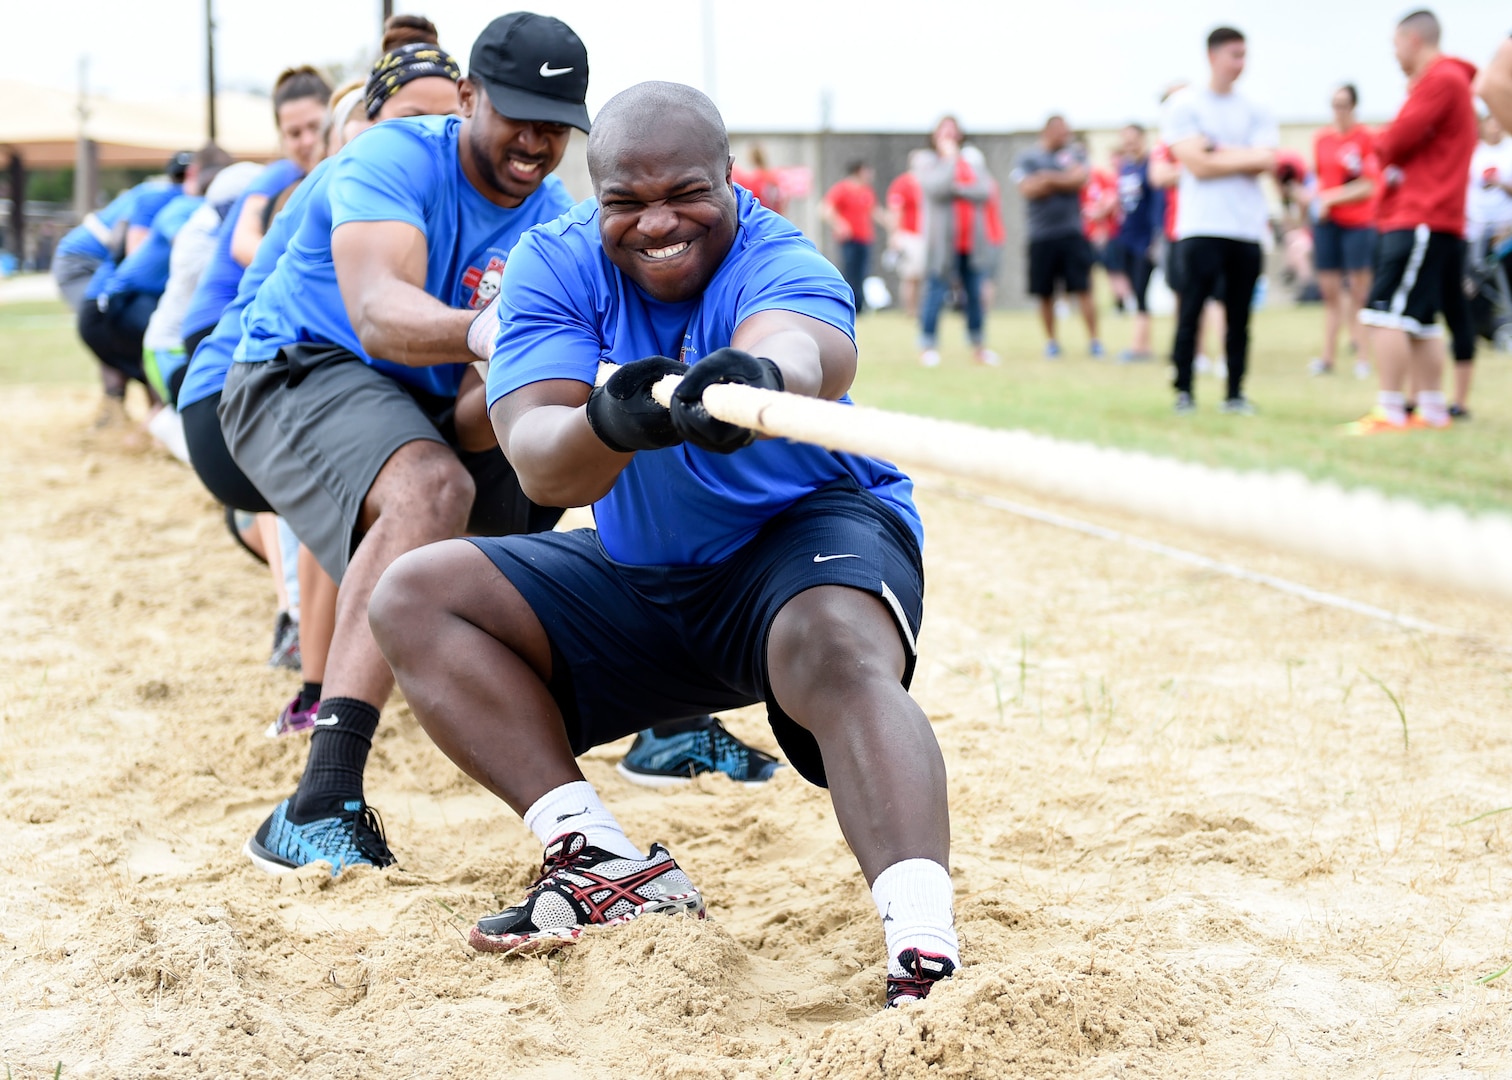 The 59th Dental Group tug-of-war team pulls with intensity during the 59th Medical Wing Warrior Medic Challenge on Joint Base San Antonio-Lackland, Texas, Nov. 4, 2016. The 59th DG won the double-elimination tug-of-war competition. (U.S. Air Force photo/Staff Sgt. Kevin Iinuma)